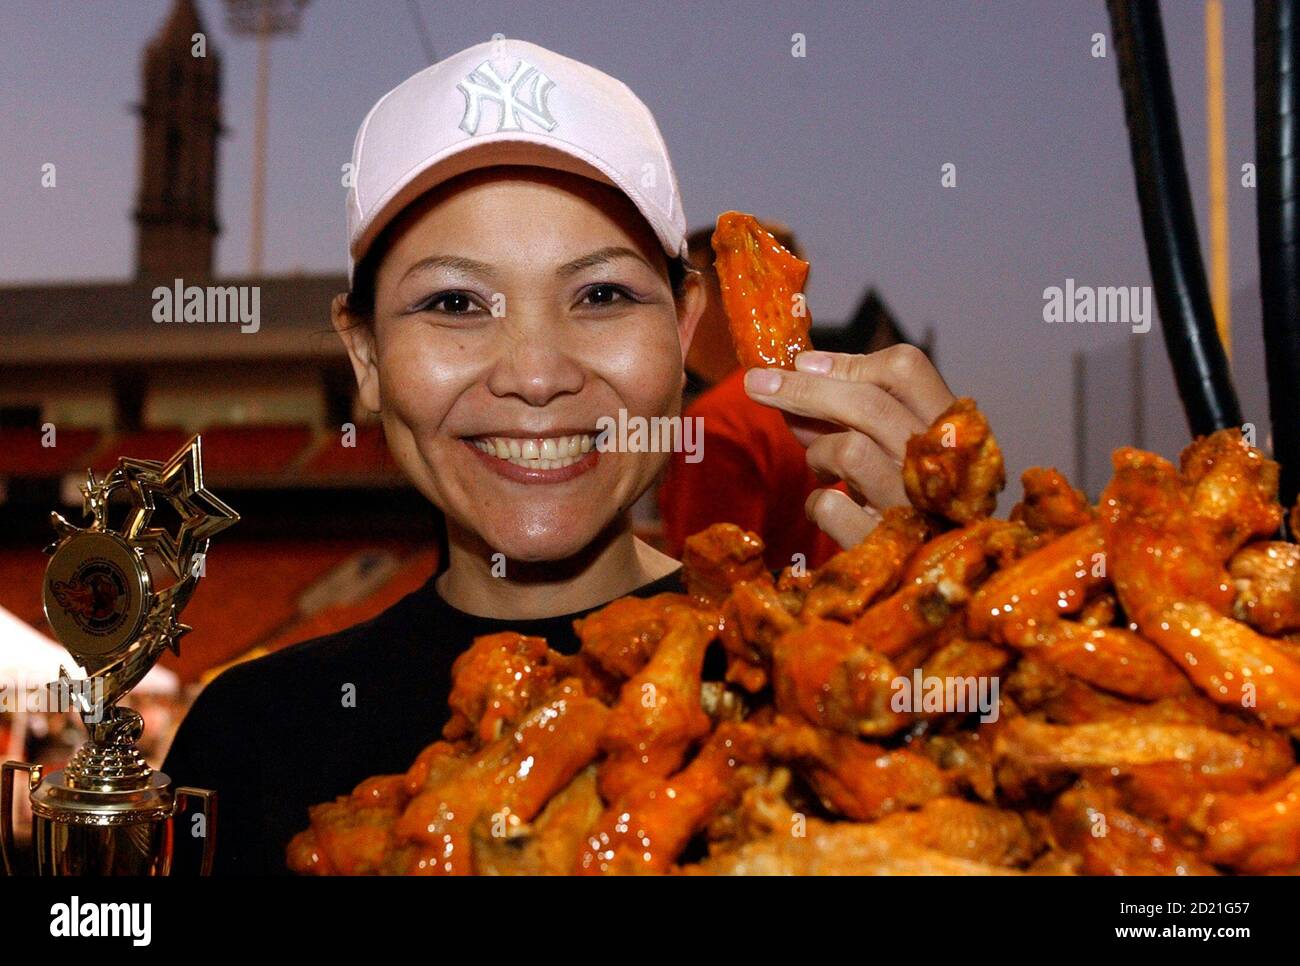 "The Black Widow" Thomas celebrates after taking first place in National Wing Festival chicken eating contest in Buffalo, New York August 30, 2008. REUTERS/Gary Wiepert (UNITED STATES Stock Photo -